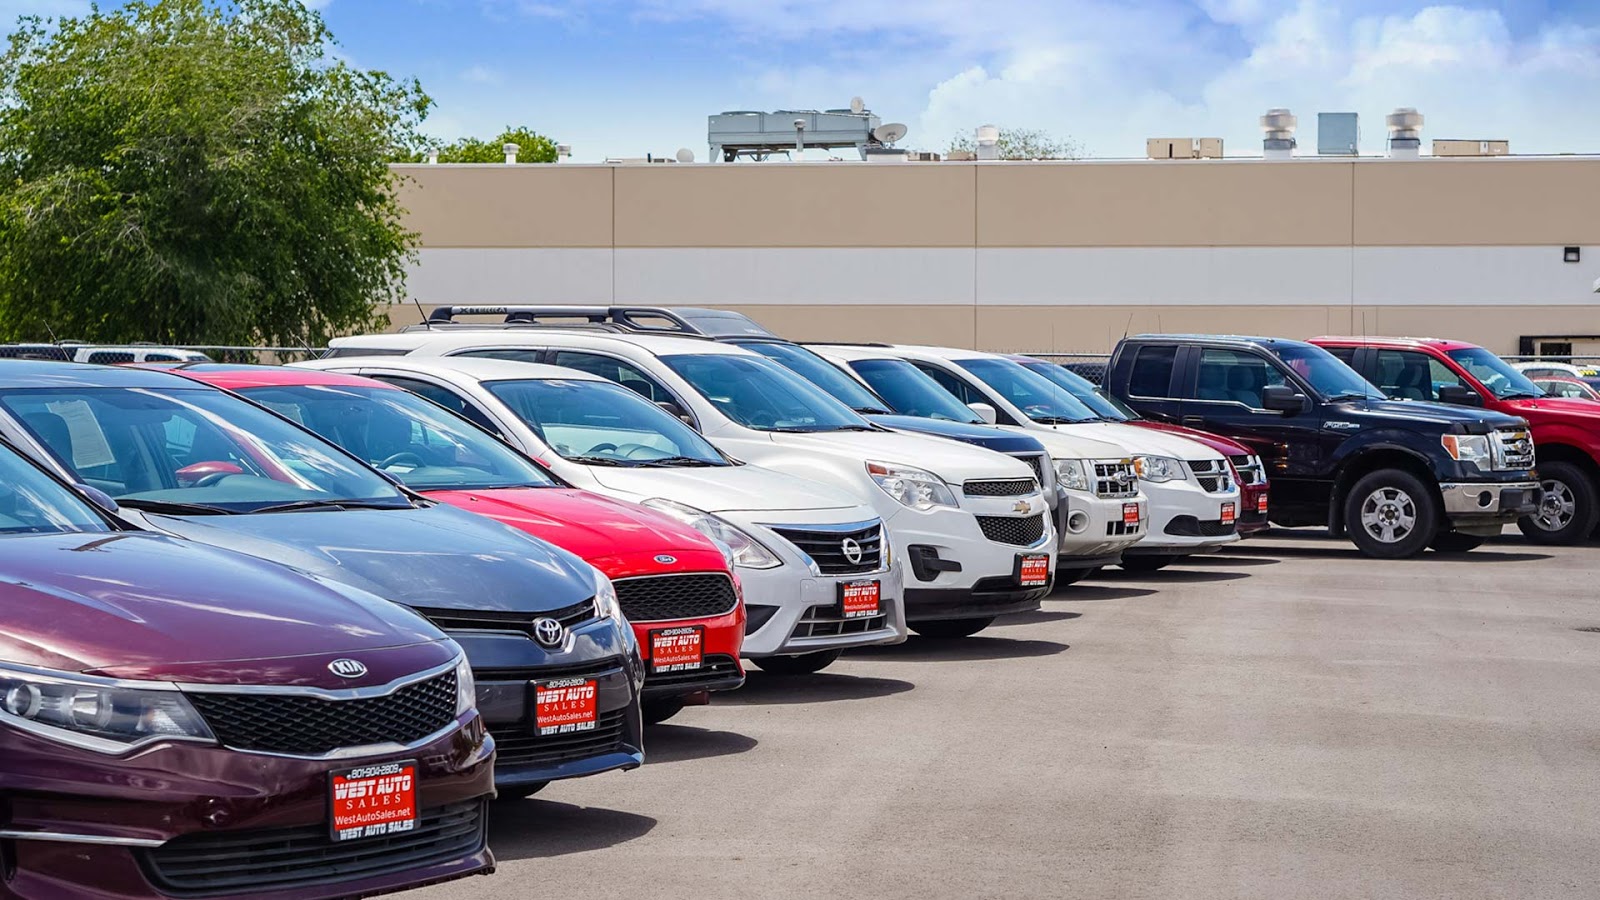 The 8 best used car dealerships in Philly  CoPilot